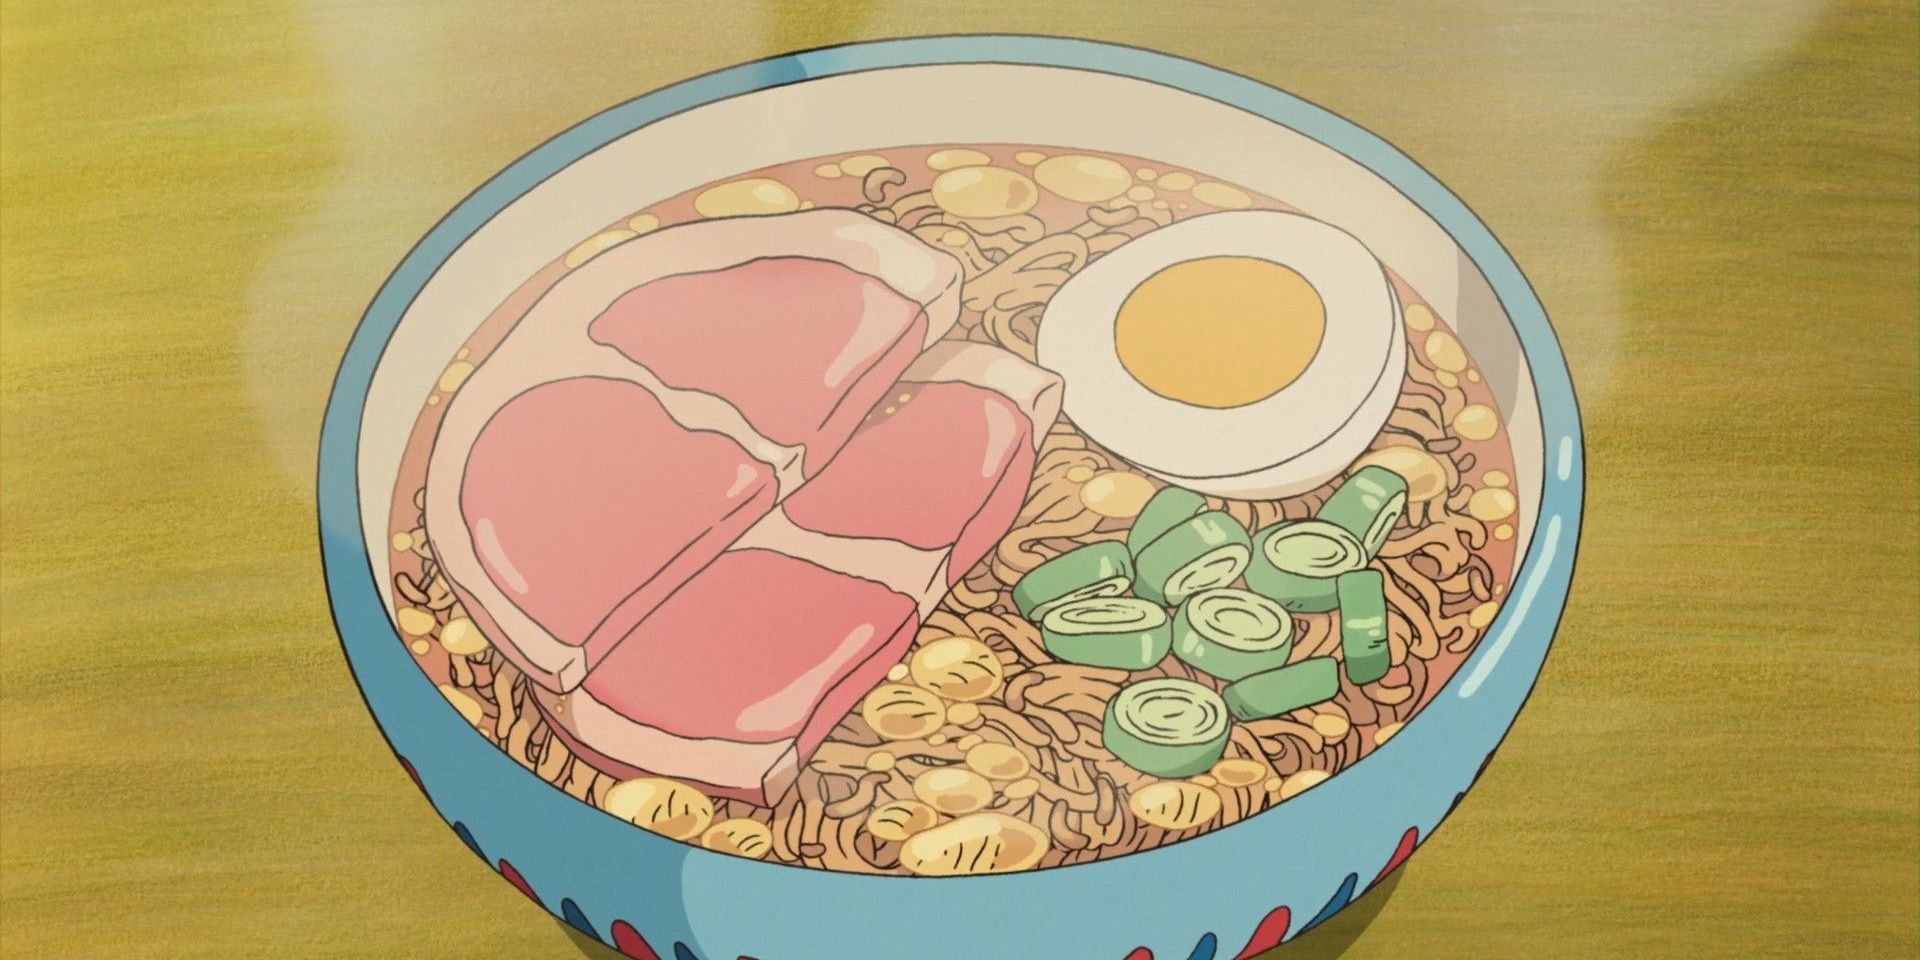 10 Mouthwatering Meals In Studio Ghibli Movies That We Wish We Could Eat